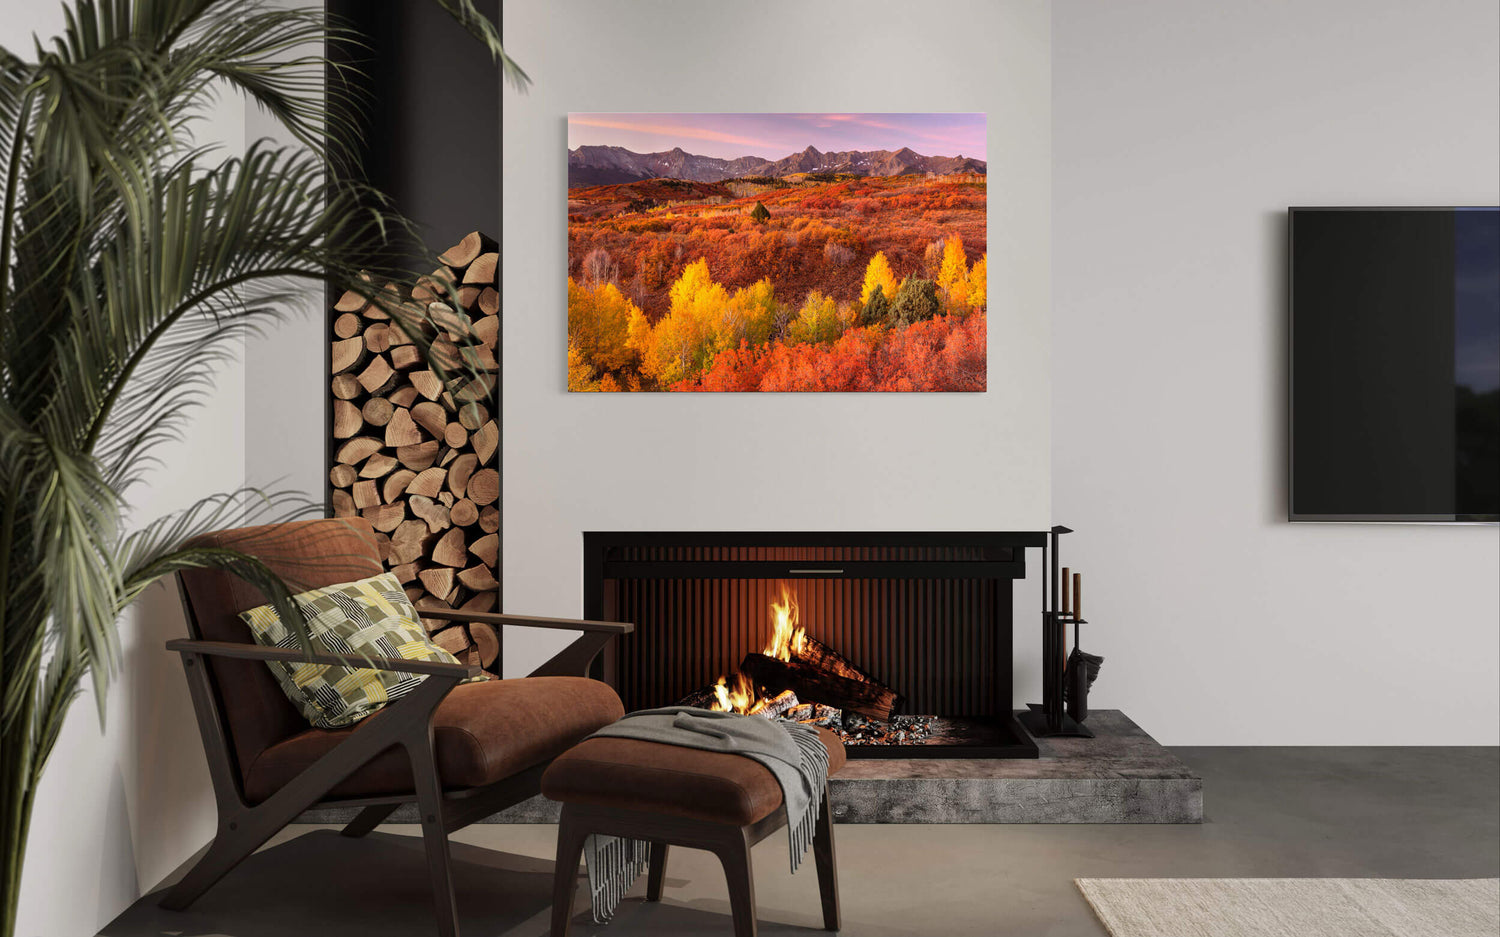 A piece of Telluride art showing a Dallas Divide fall colors picture hangs in a living room.